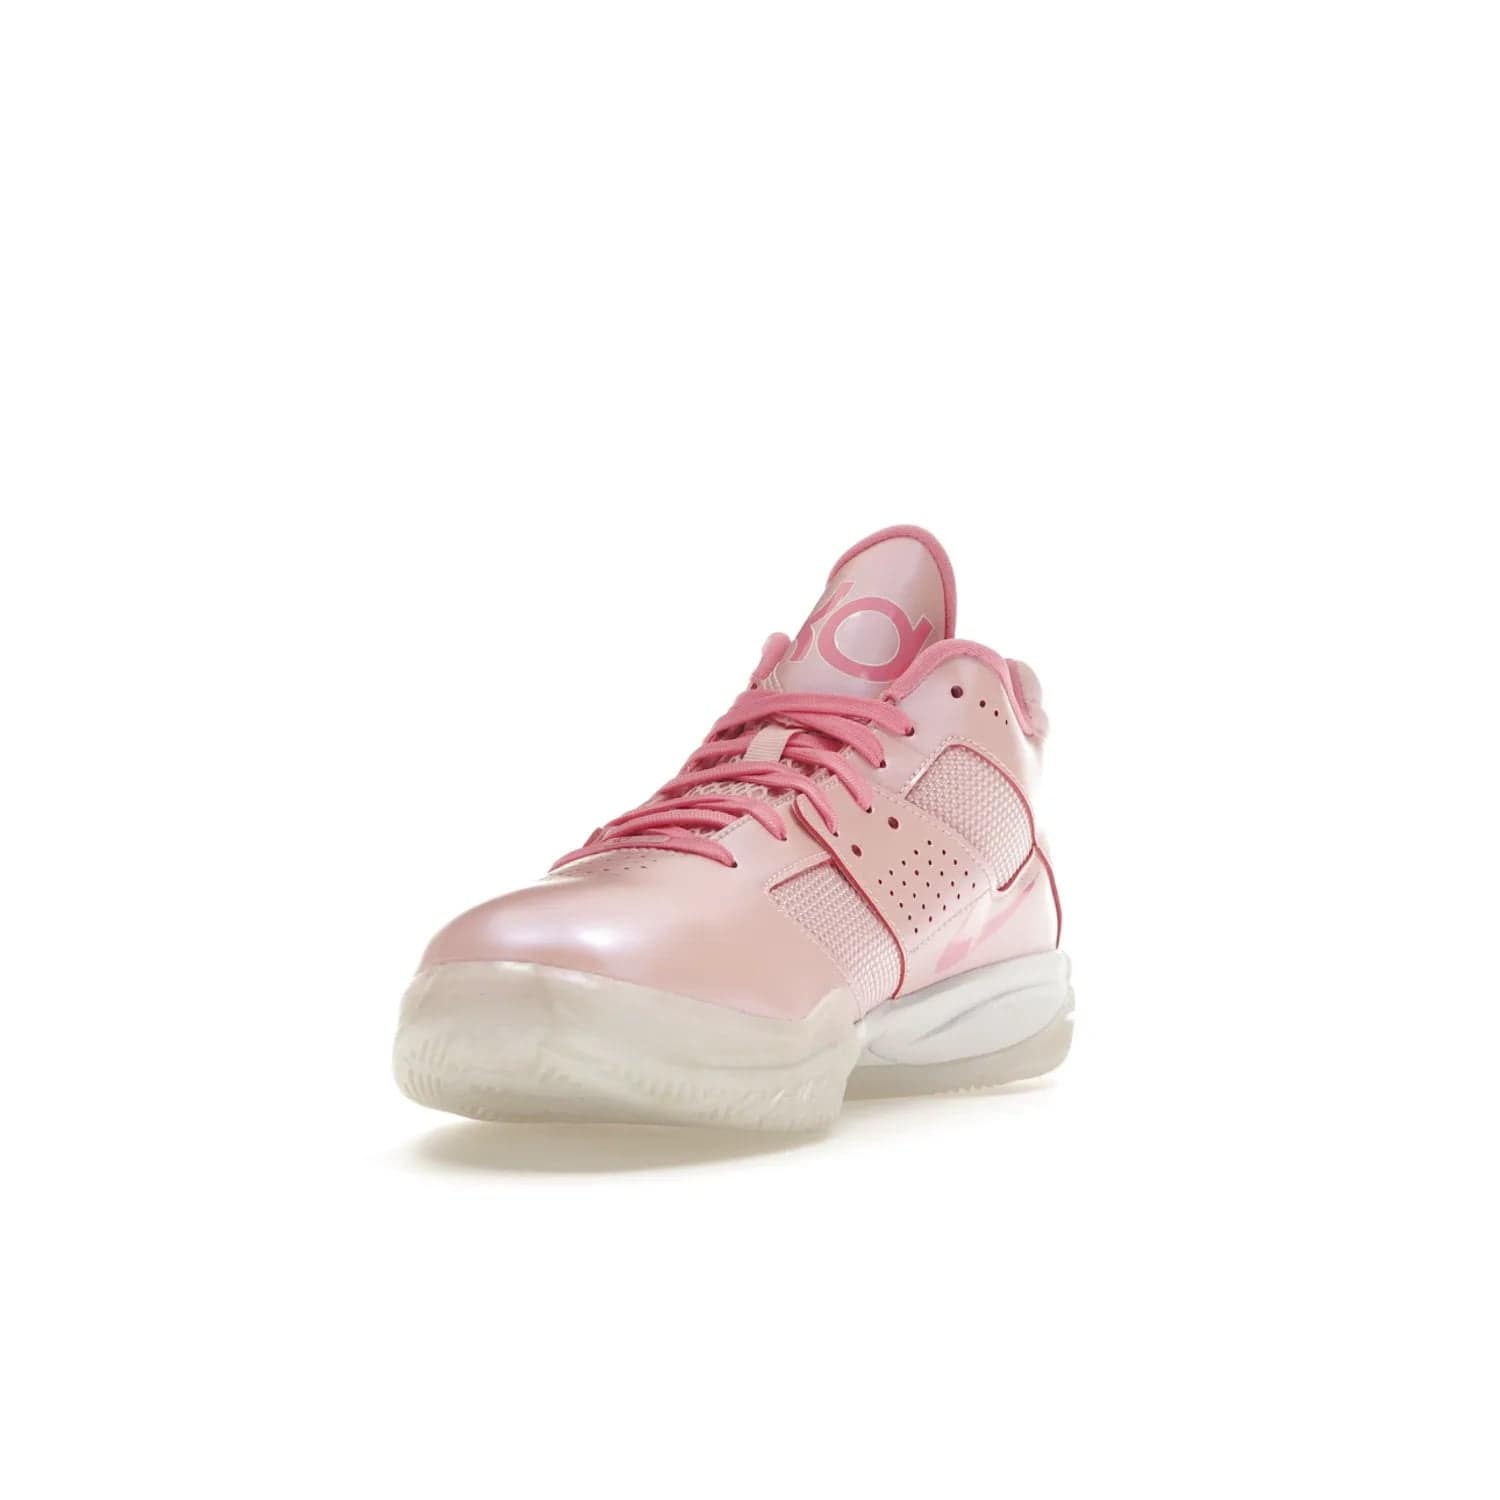 Nike KD 3 Aunt Pearl - Image 13 - Only at www.BallersClubKickz.com - Introducing the Nike KD 3 Aunt Pearl. Featuring a bold Medium Soft Pink, White, & Lotus Pink colorway. Get ready to stand out this October 15th.